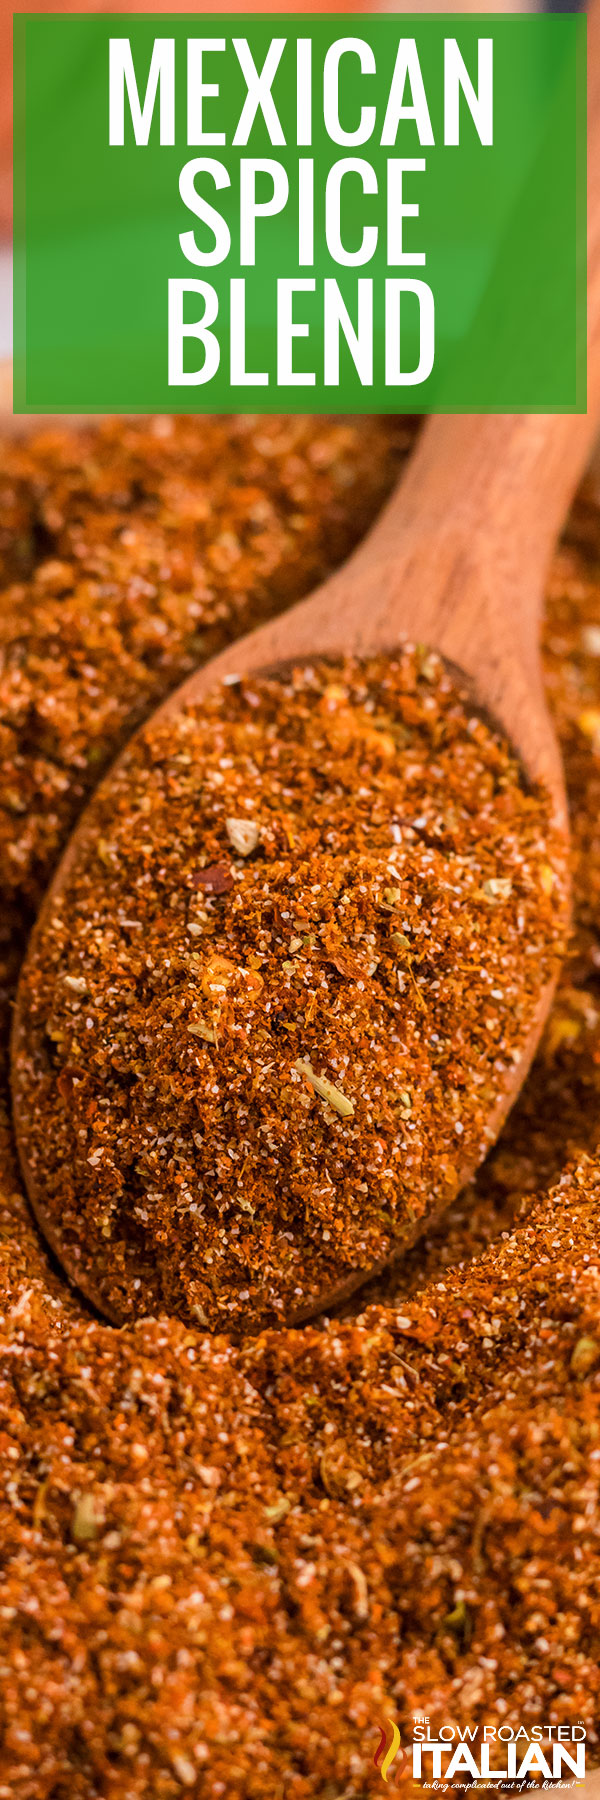 mexican spice blend